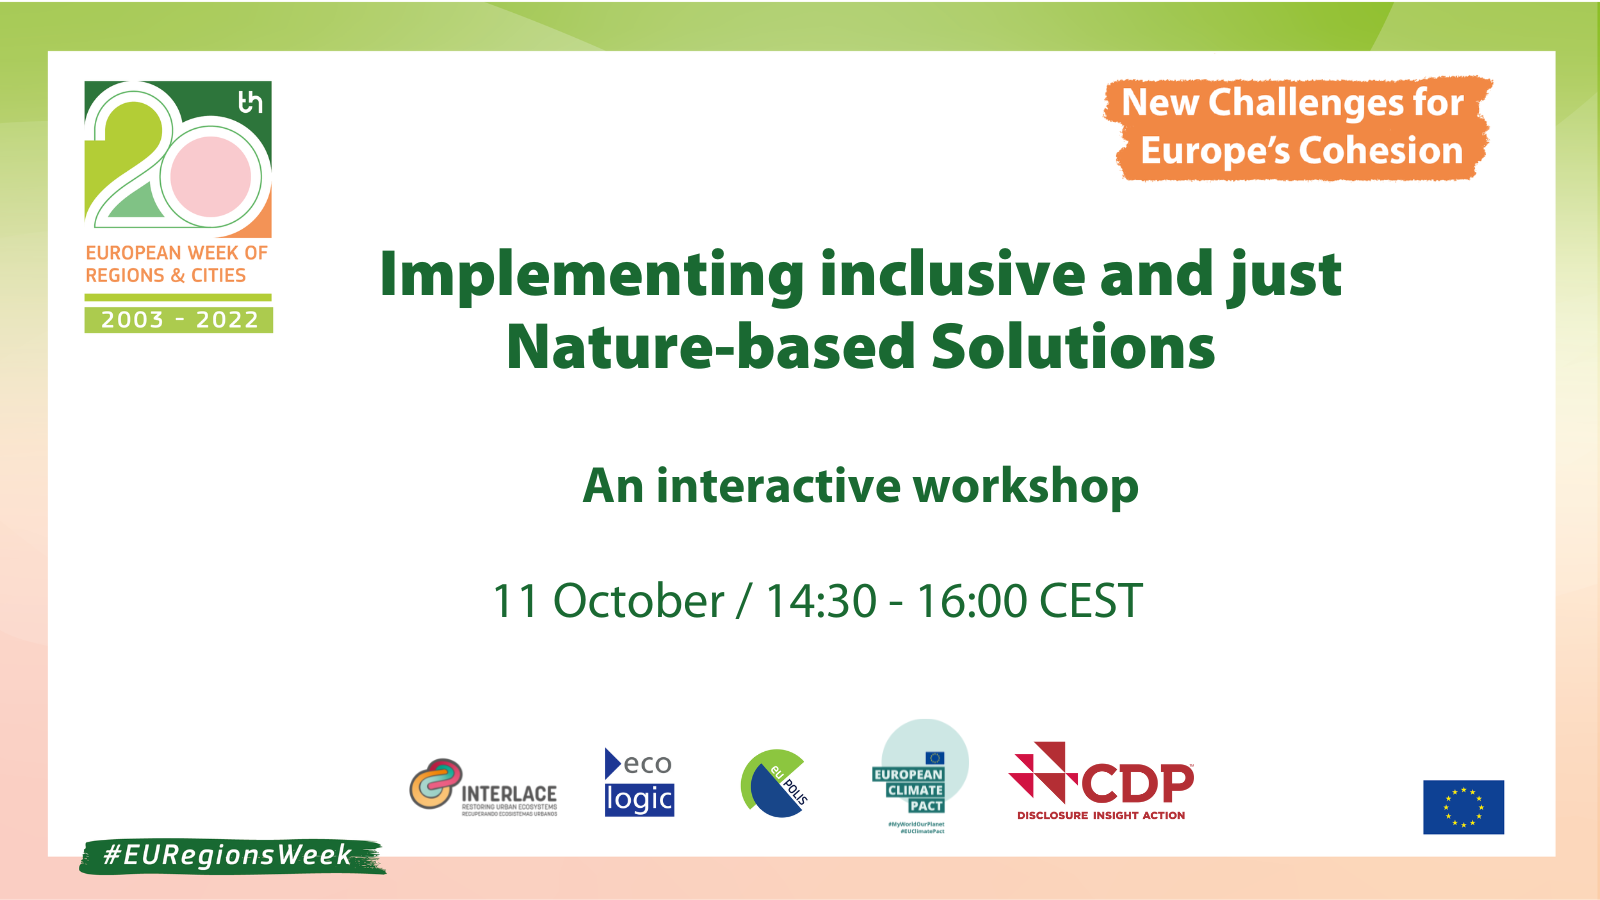 social card of the interactiv workshop "Implementing inclusive and just Nature-based Solutions"